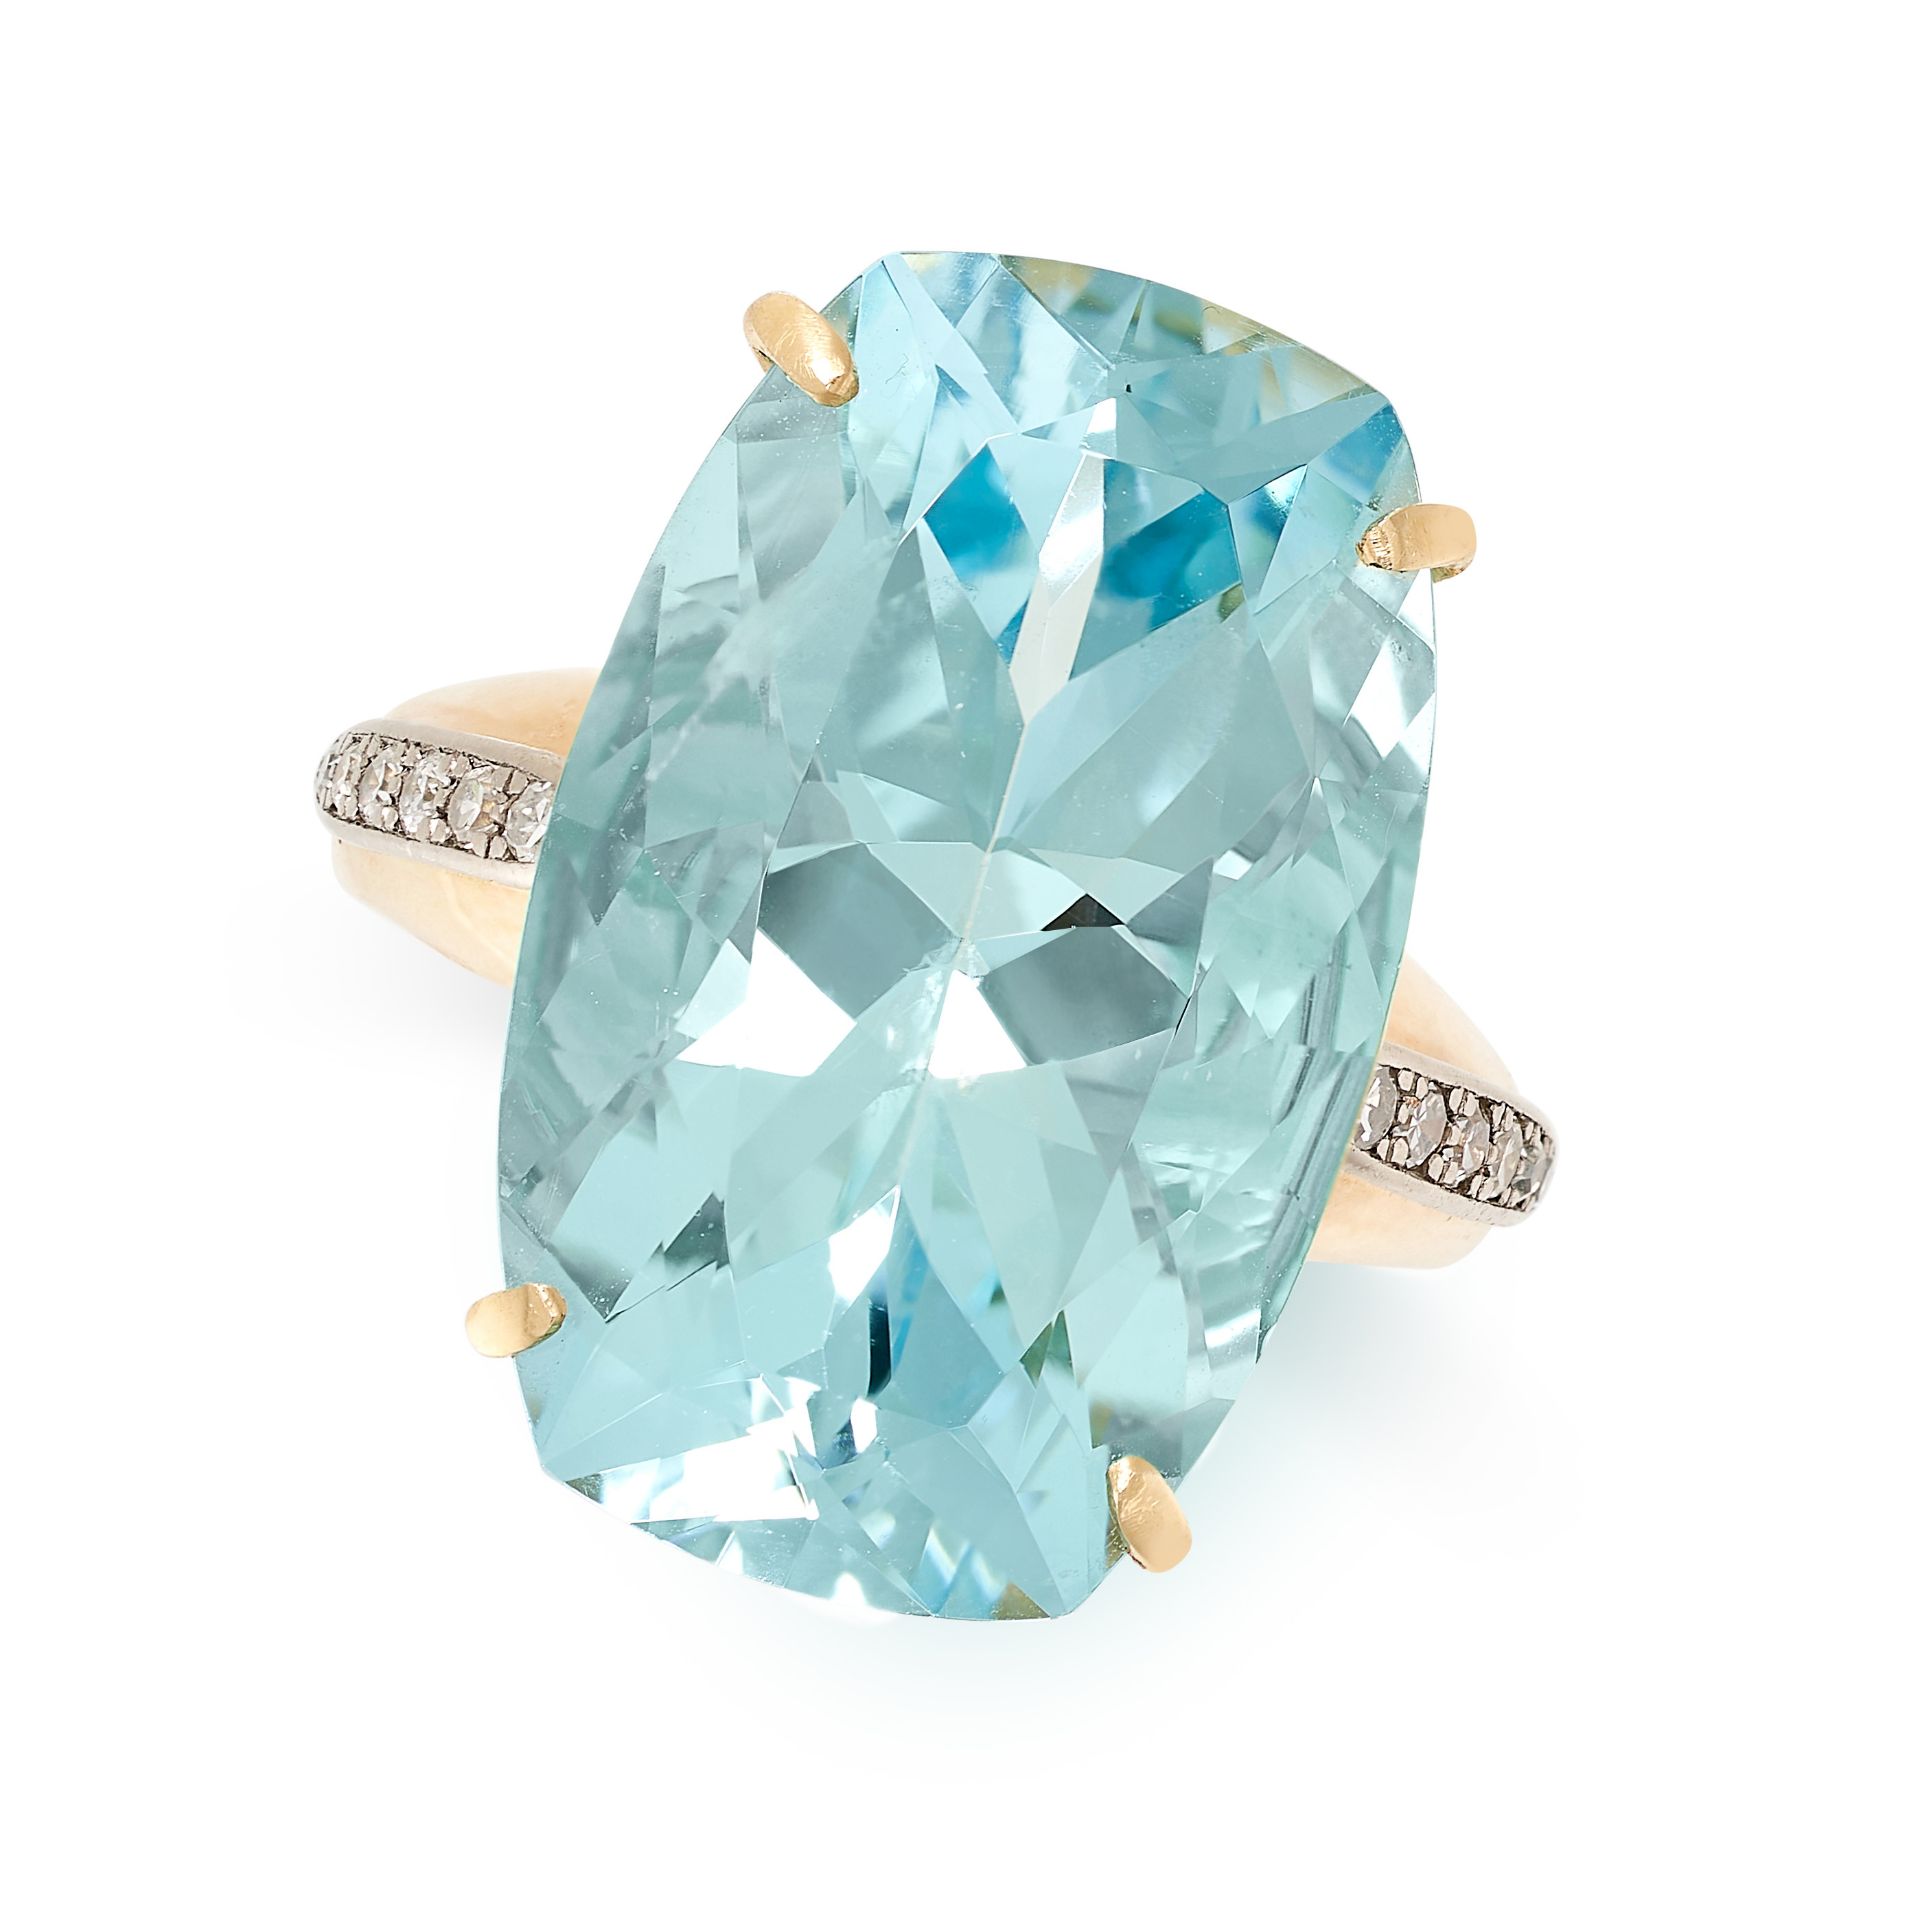 AN AQUAMARINE AND DIAMOND RING in 18ct yellow gold, set with a central elongated cushion cut